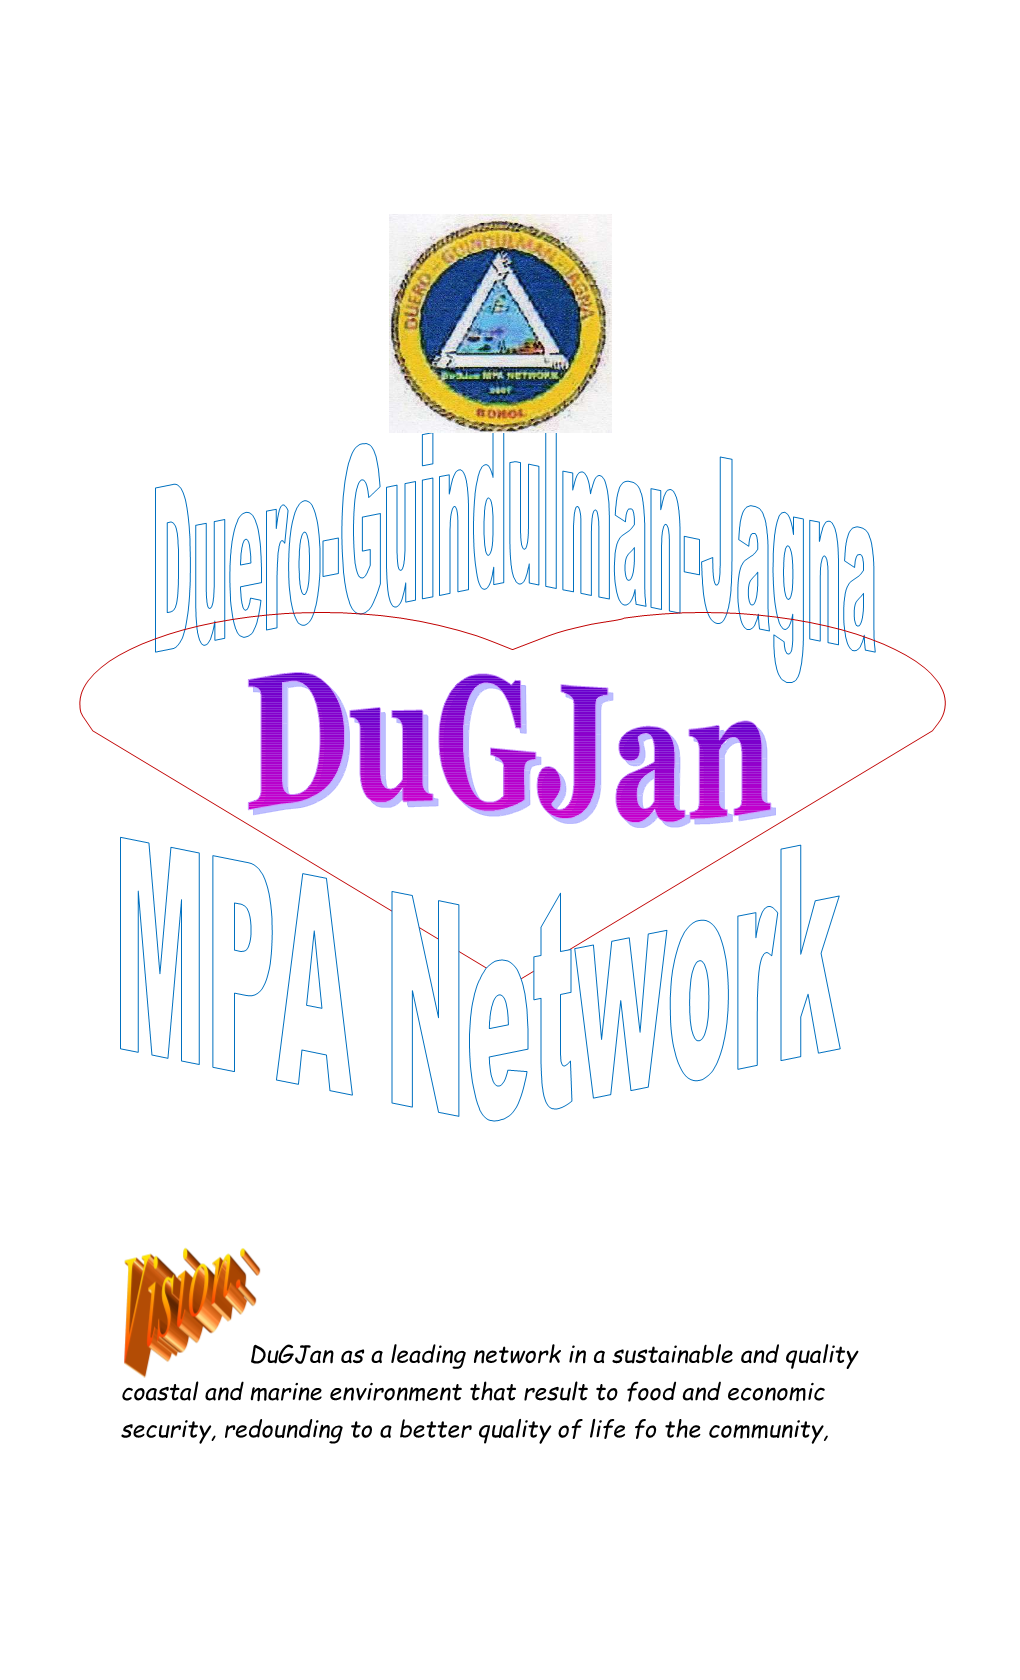 Dugjan As a Leading Network in a Sustainable and Quality Coastal and Marine Environment